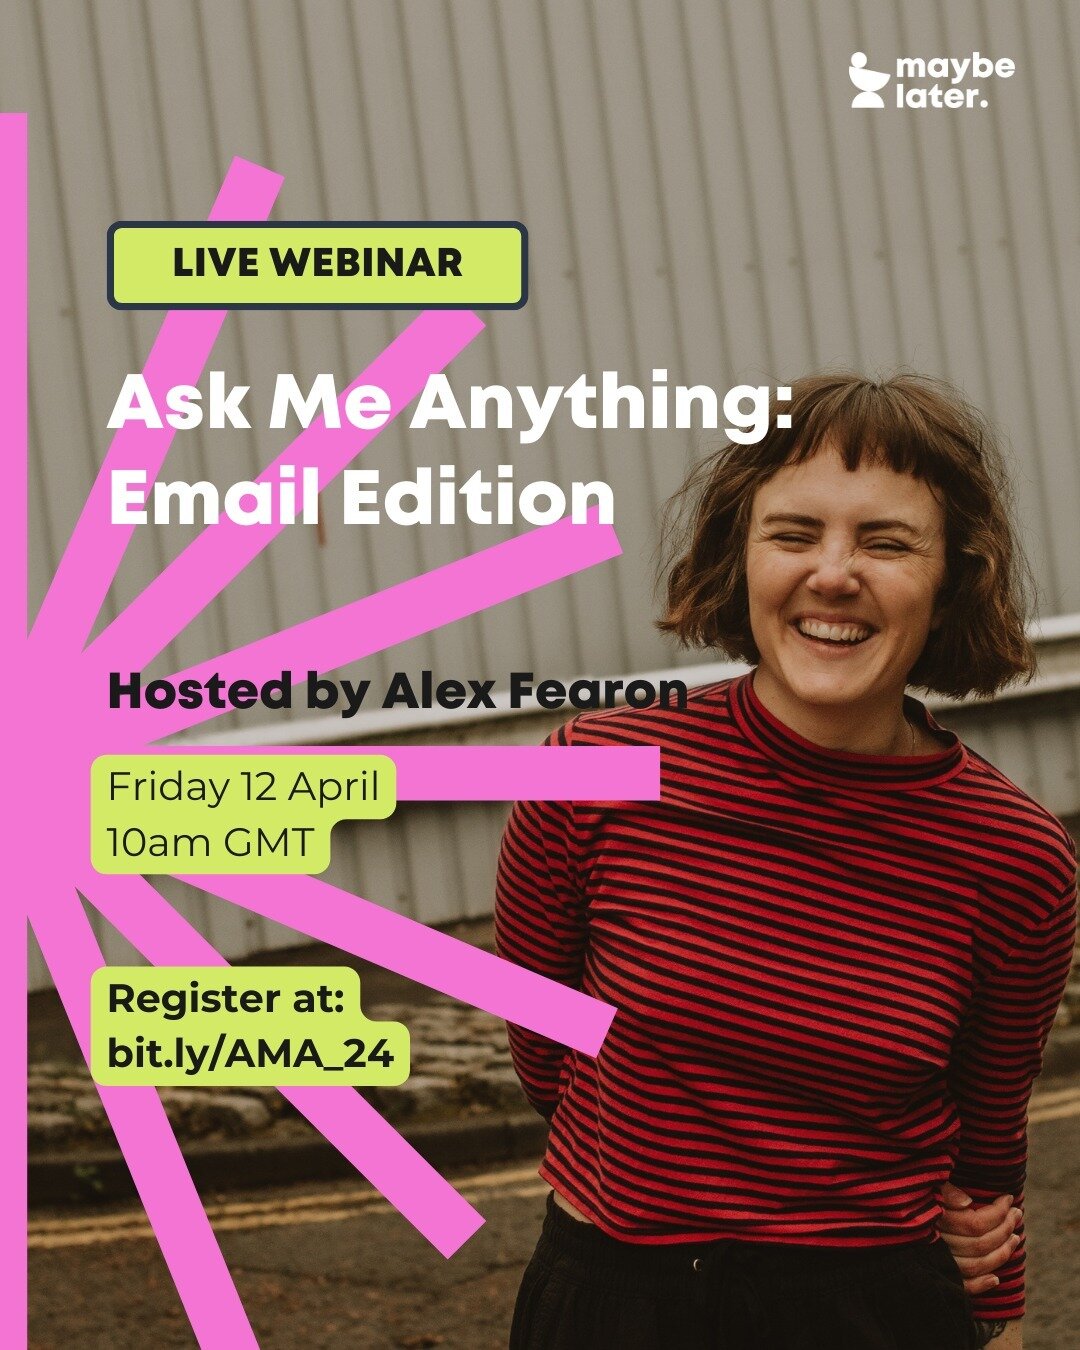 Announcing a new email marketing webinar series: Ask Me Anything. ⚡️

What if you could ask that email copywriting or @mailchimp question that's been taking up space in your brain for months? 

Things like: 
- Why do you think our CTA isn't working a